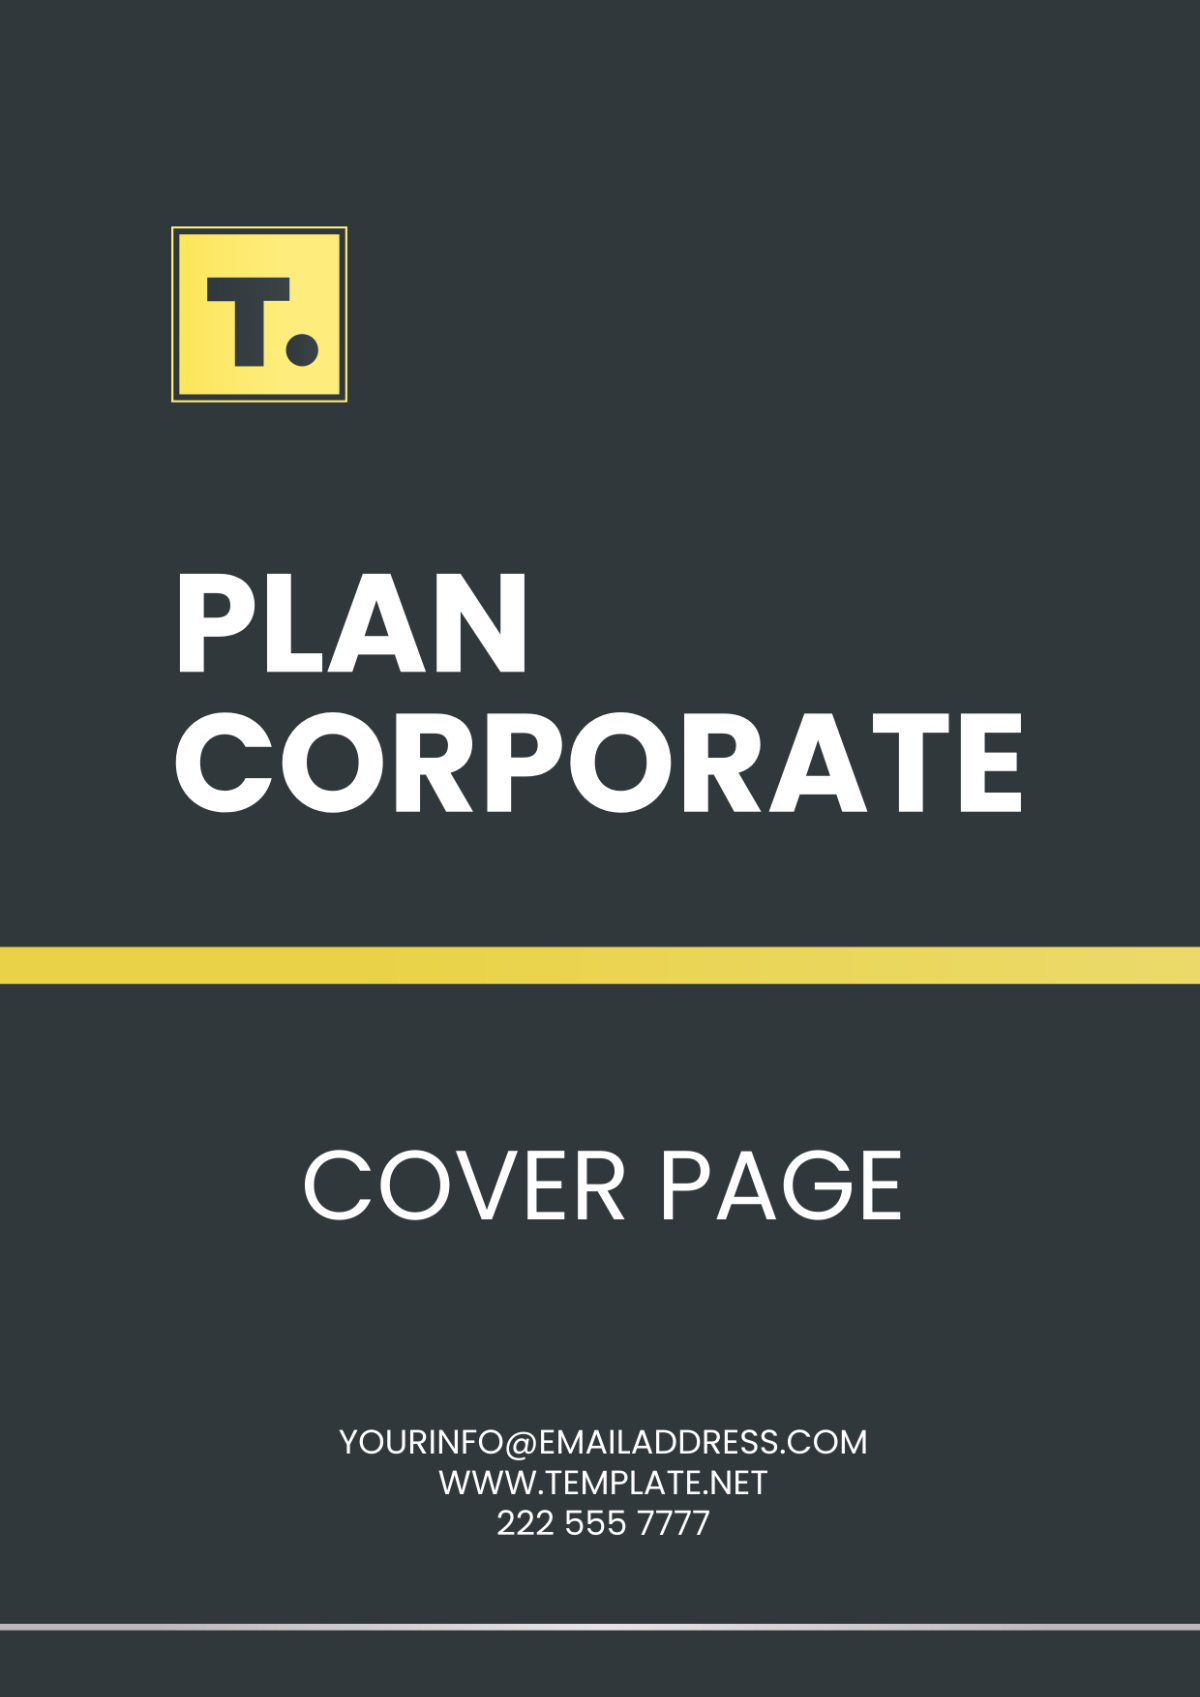 Plan Corporate Cover Page Template